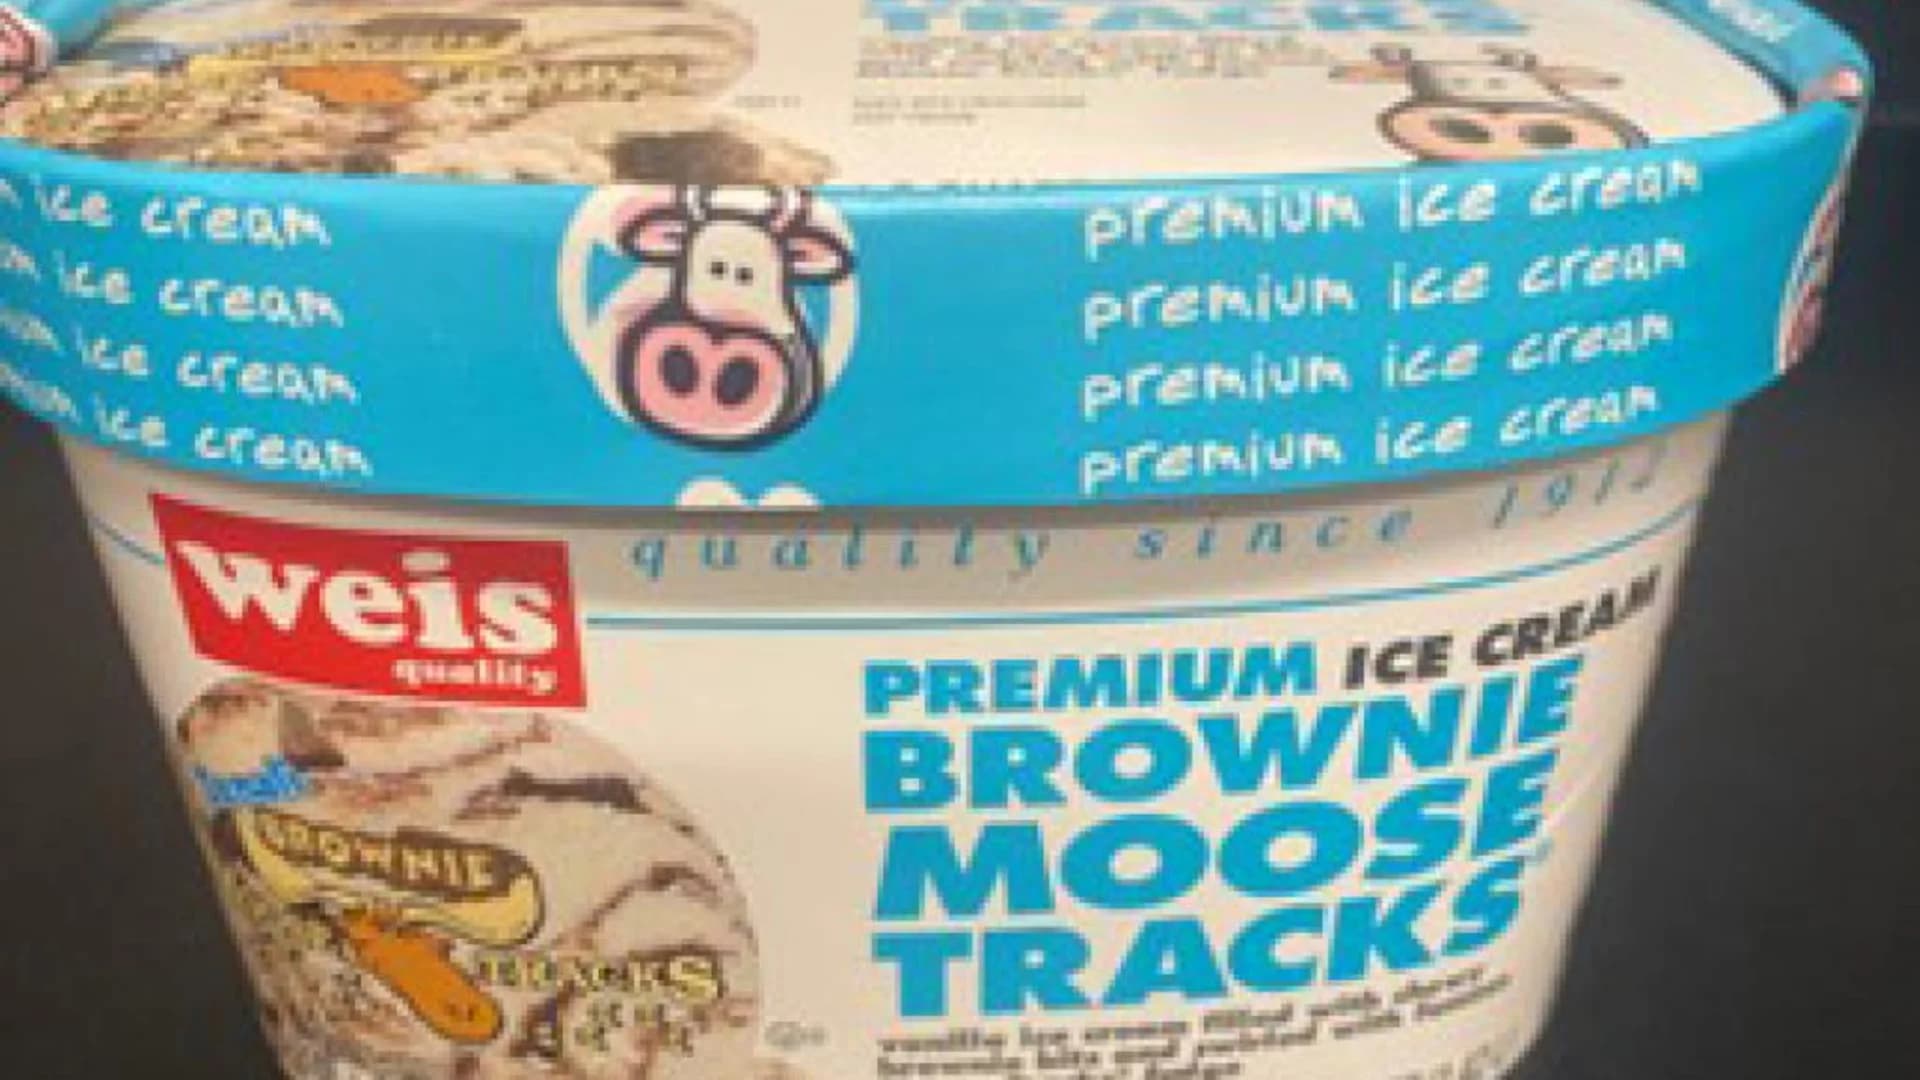 Weis Markets recall Brownie Moose Tracks ice cream that may contain eggs